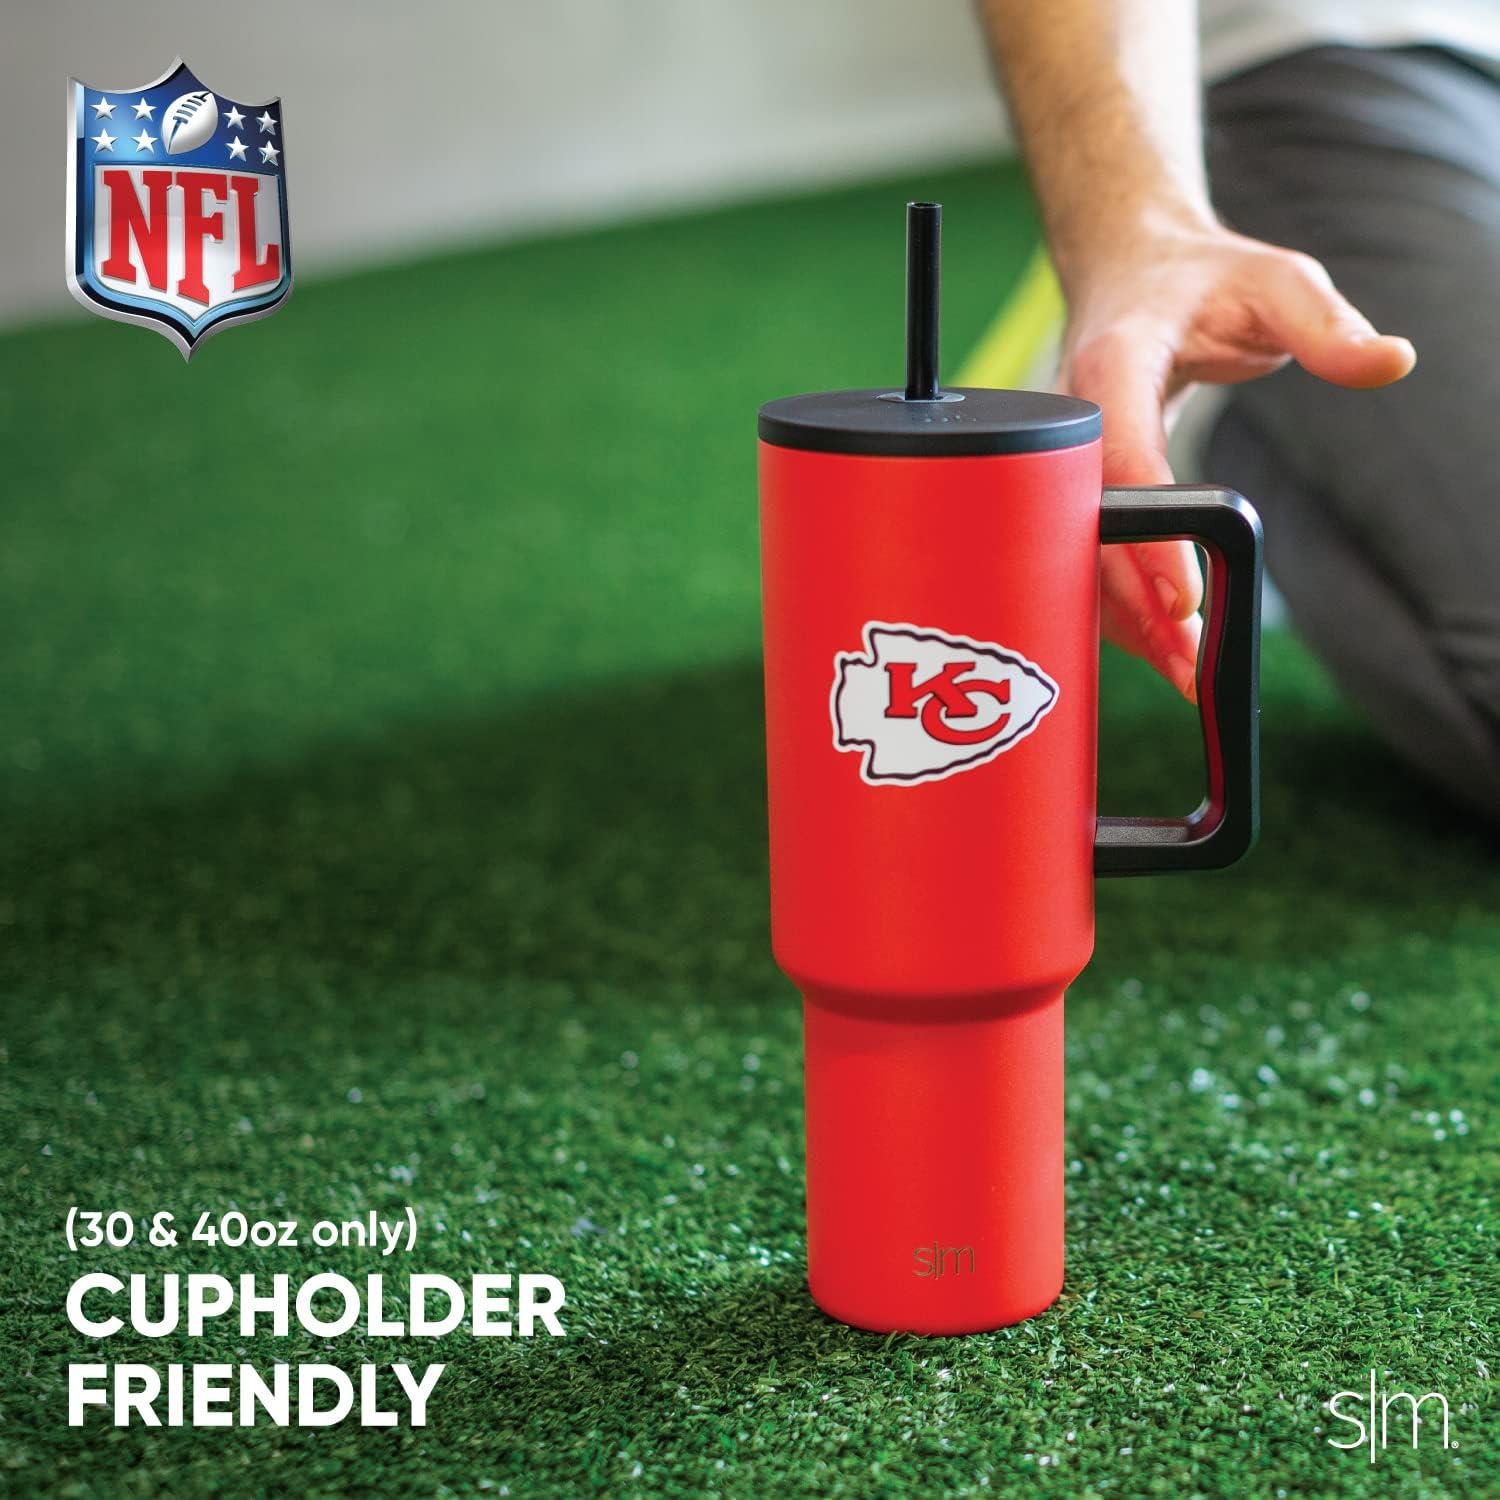 Lowest Price: Simple Modern 30 oz Tumbler with Handle and